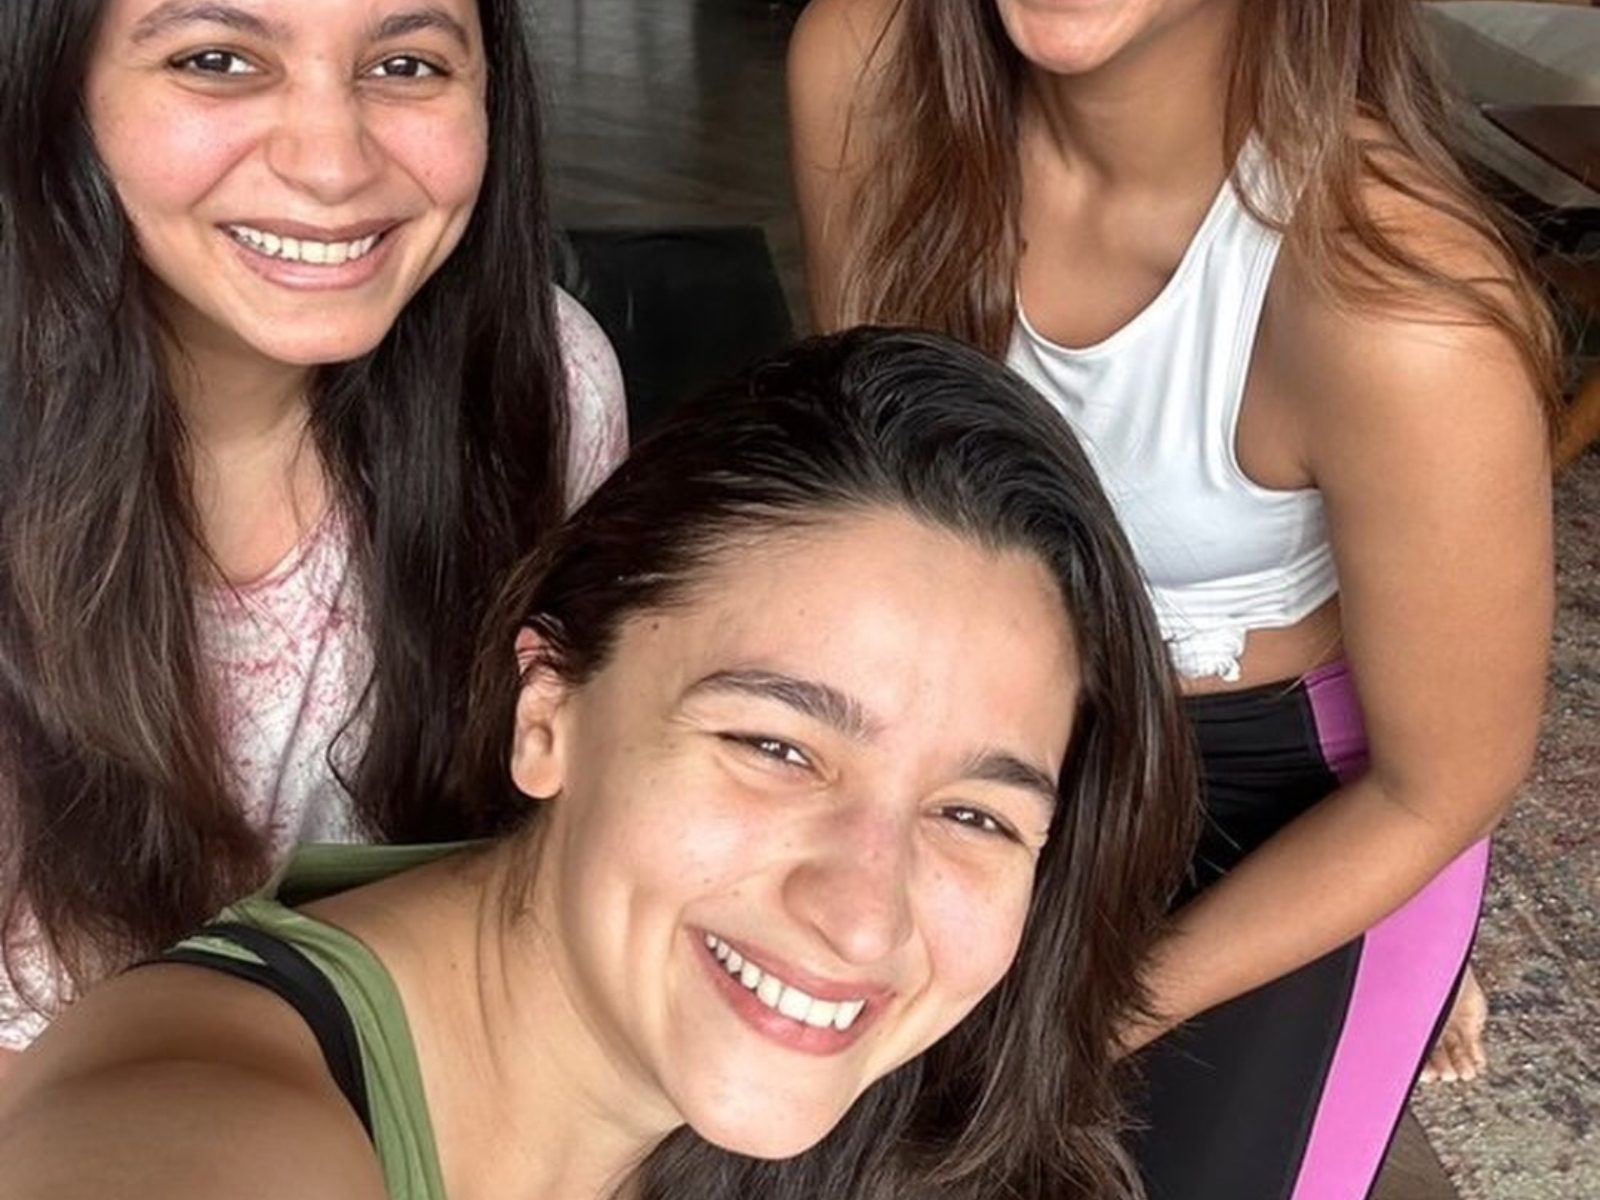 Alia Bhatt's Sunday is all about listening to Christmas rhymes with Raha,  actress glows in sunshine selfie | Entertainment News, Times Now